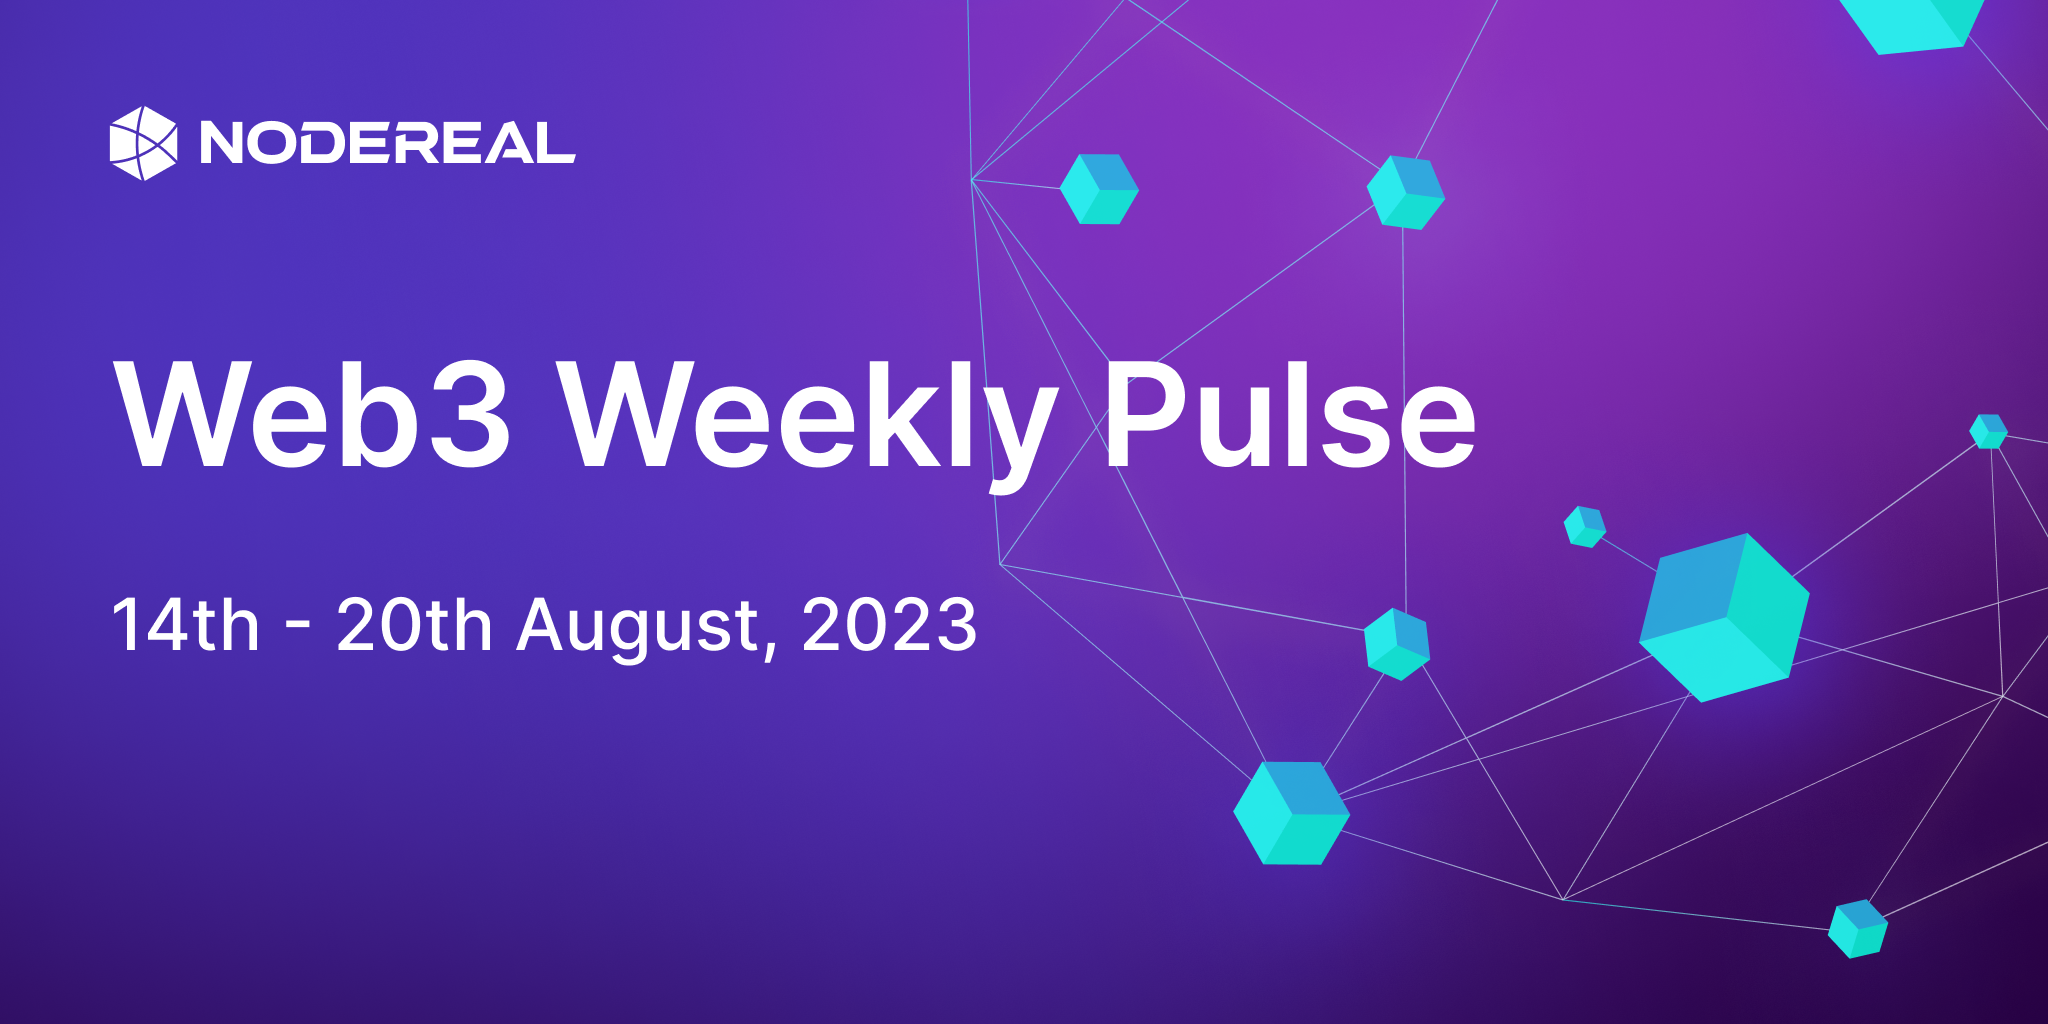 Web3 Weekly Pulse: 14th - 20th August